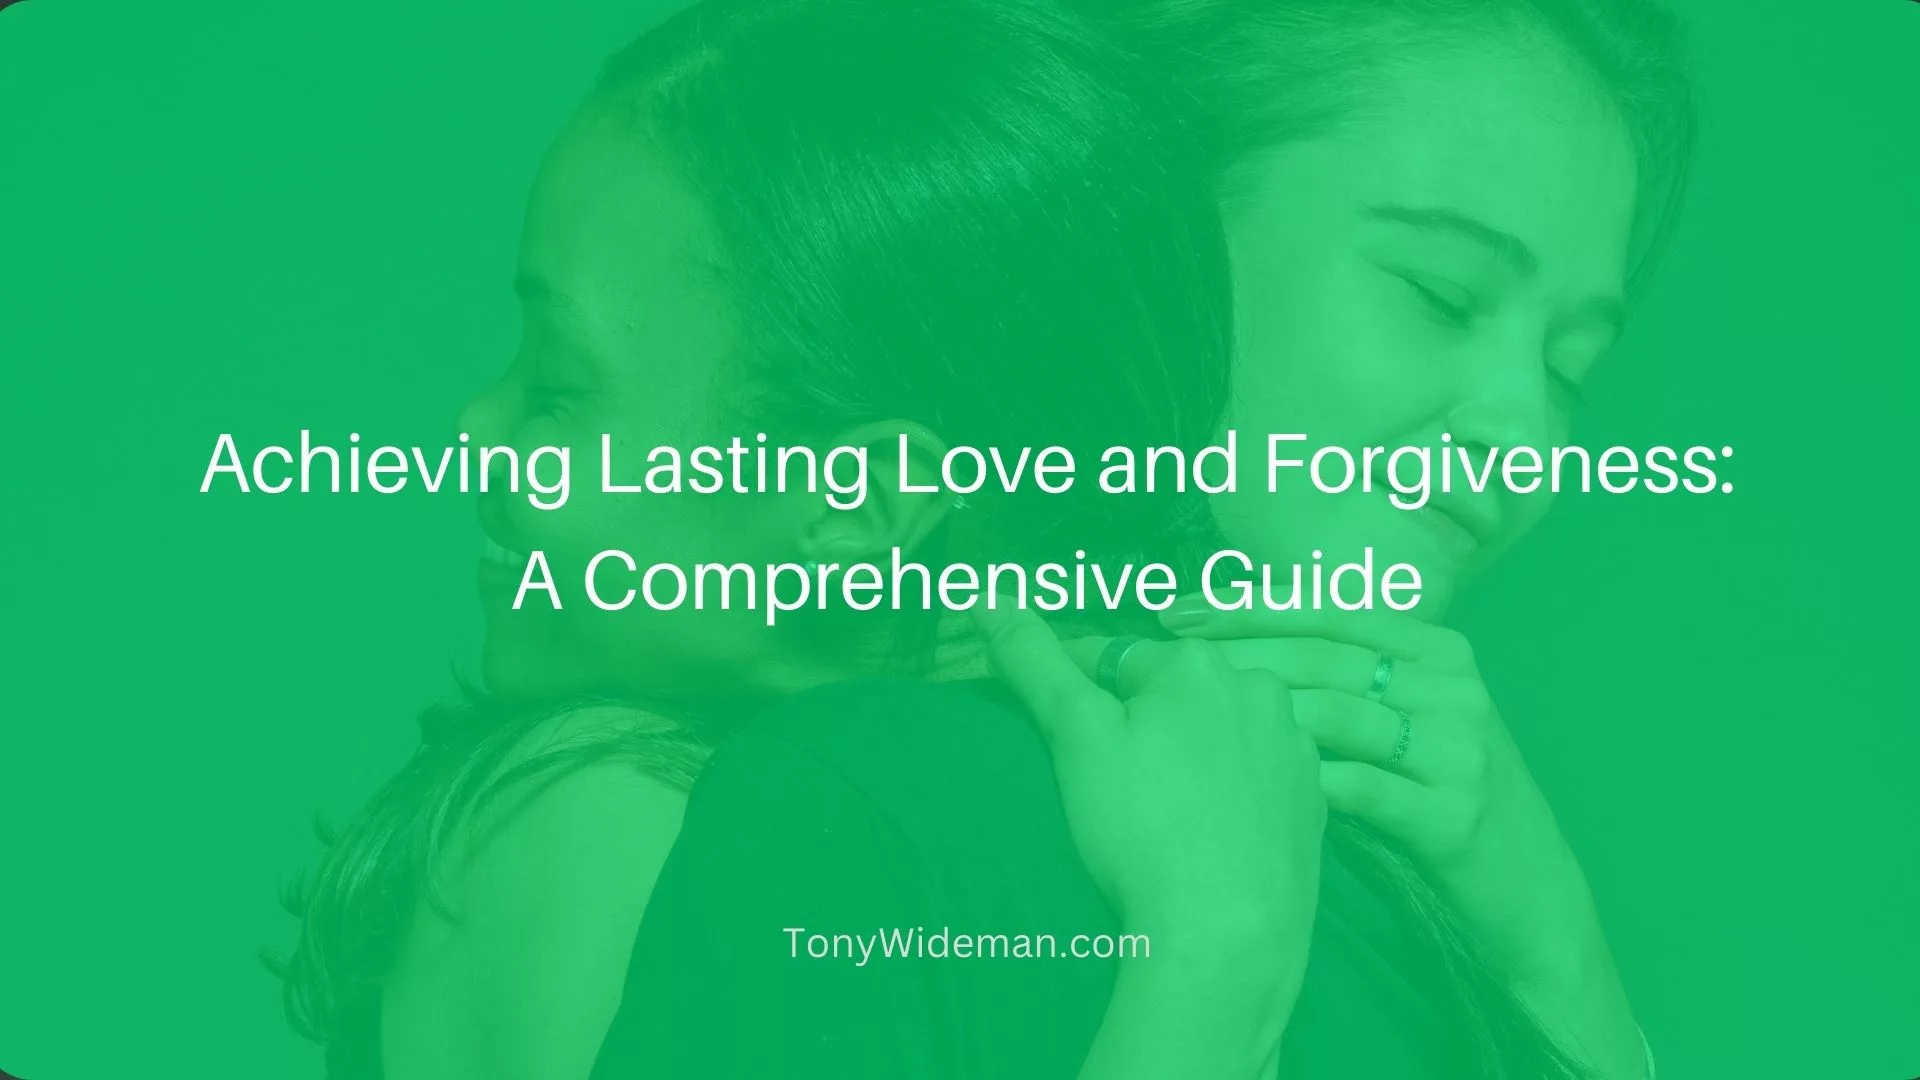 Achieving Lasting Love and Forgiveness: A Comprehensive Guide